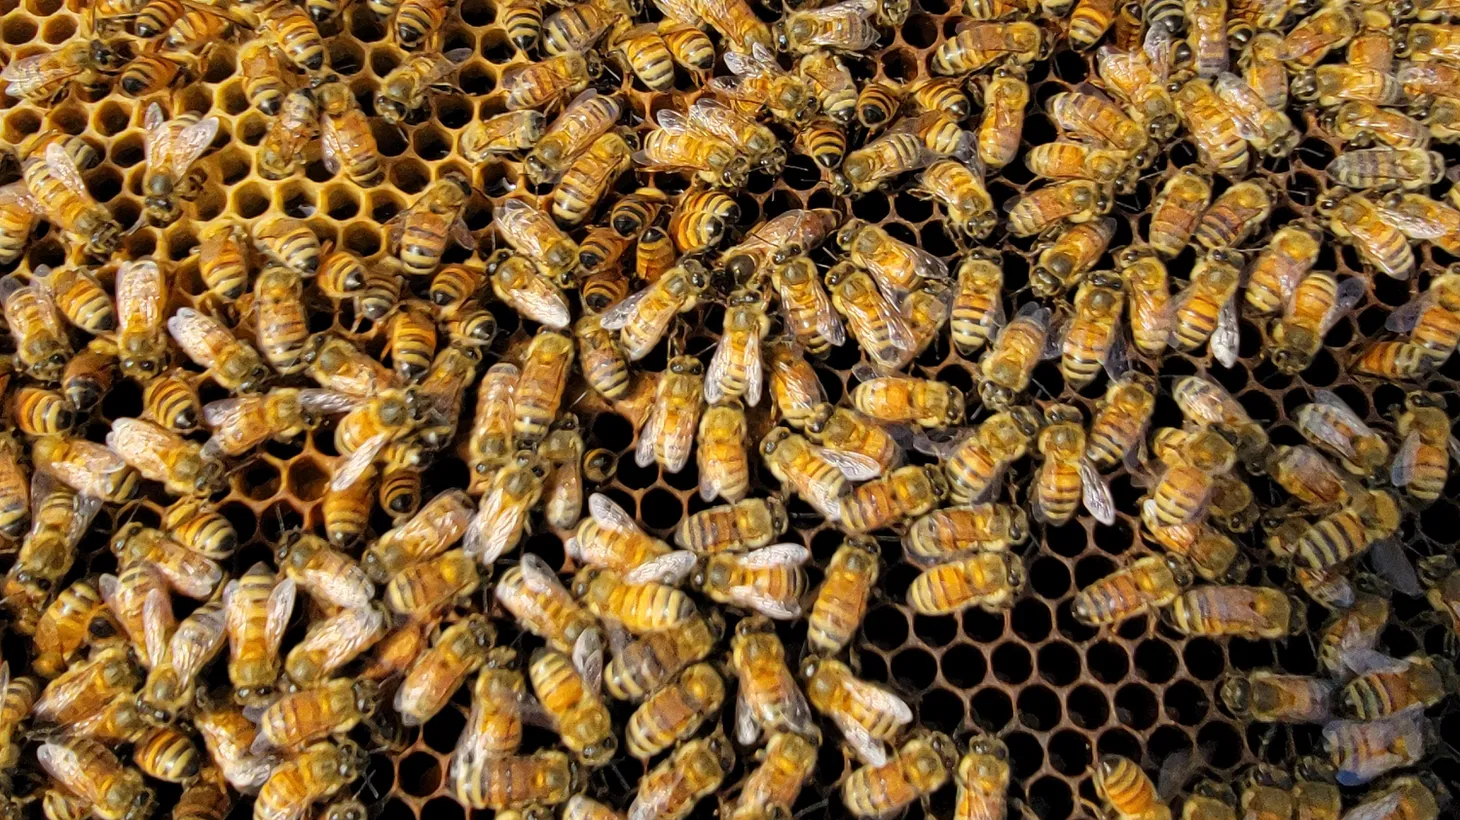 Bees are brought in from Montana, Idaho, Texas, and Florida during California's almond pollination season.